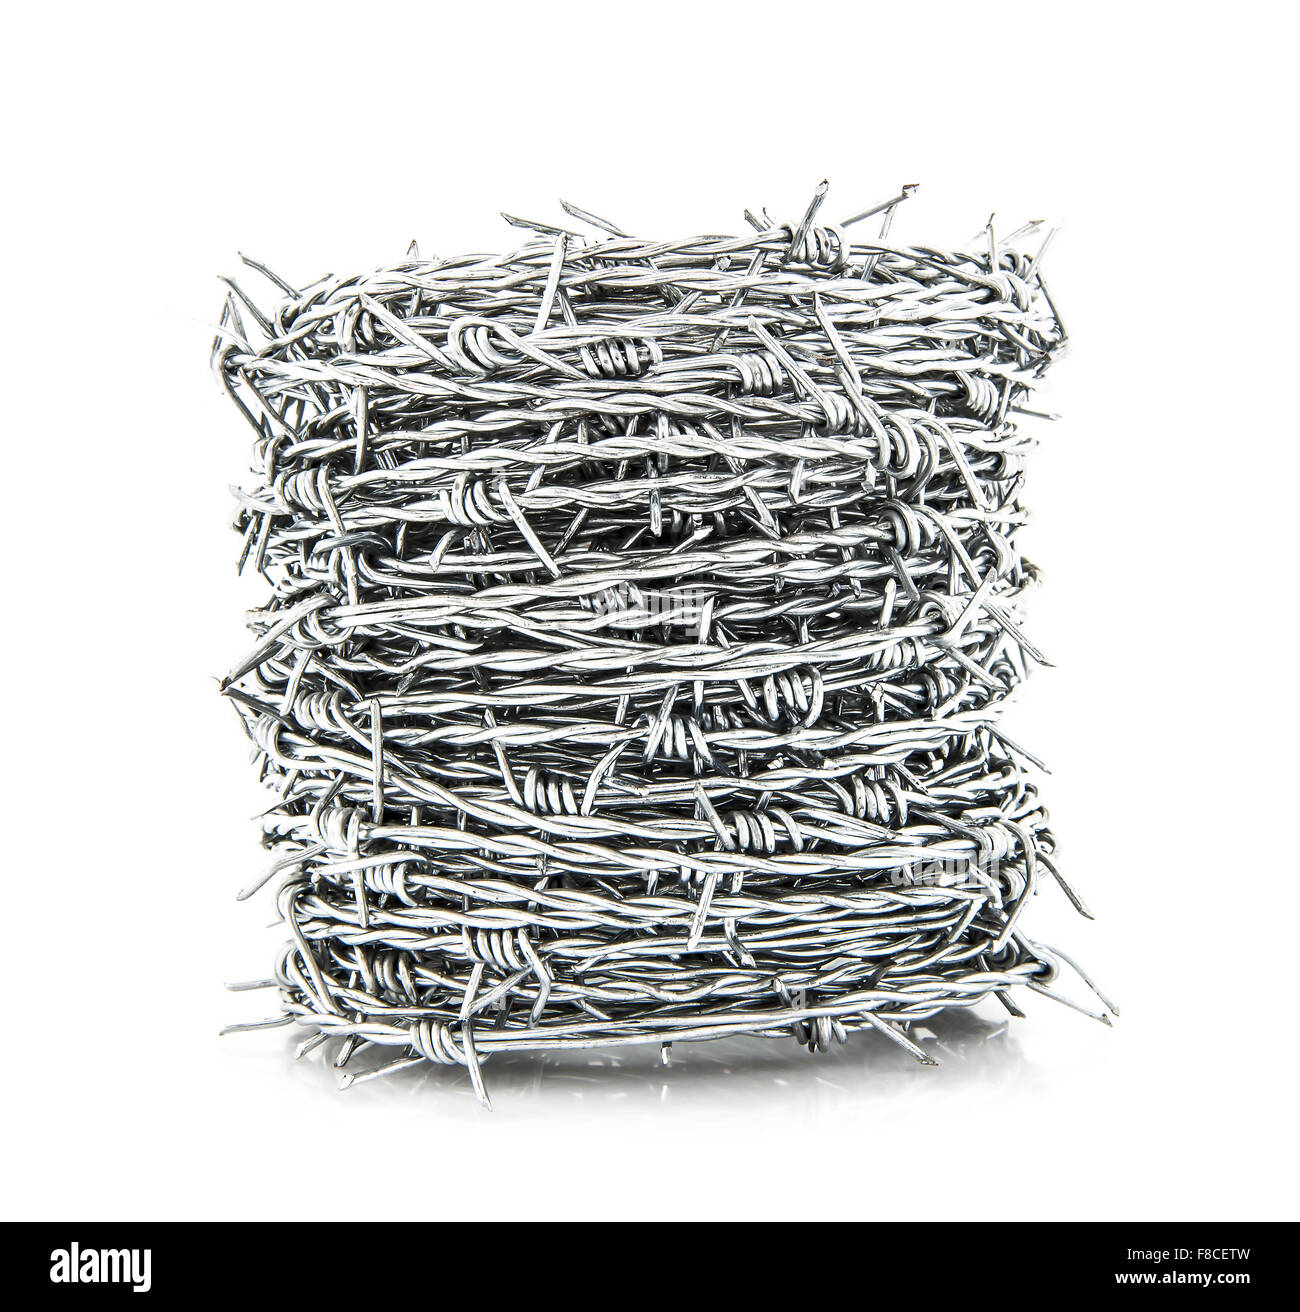 Coil of Barbed wire isolated on white background Stock Photo